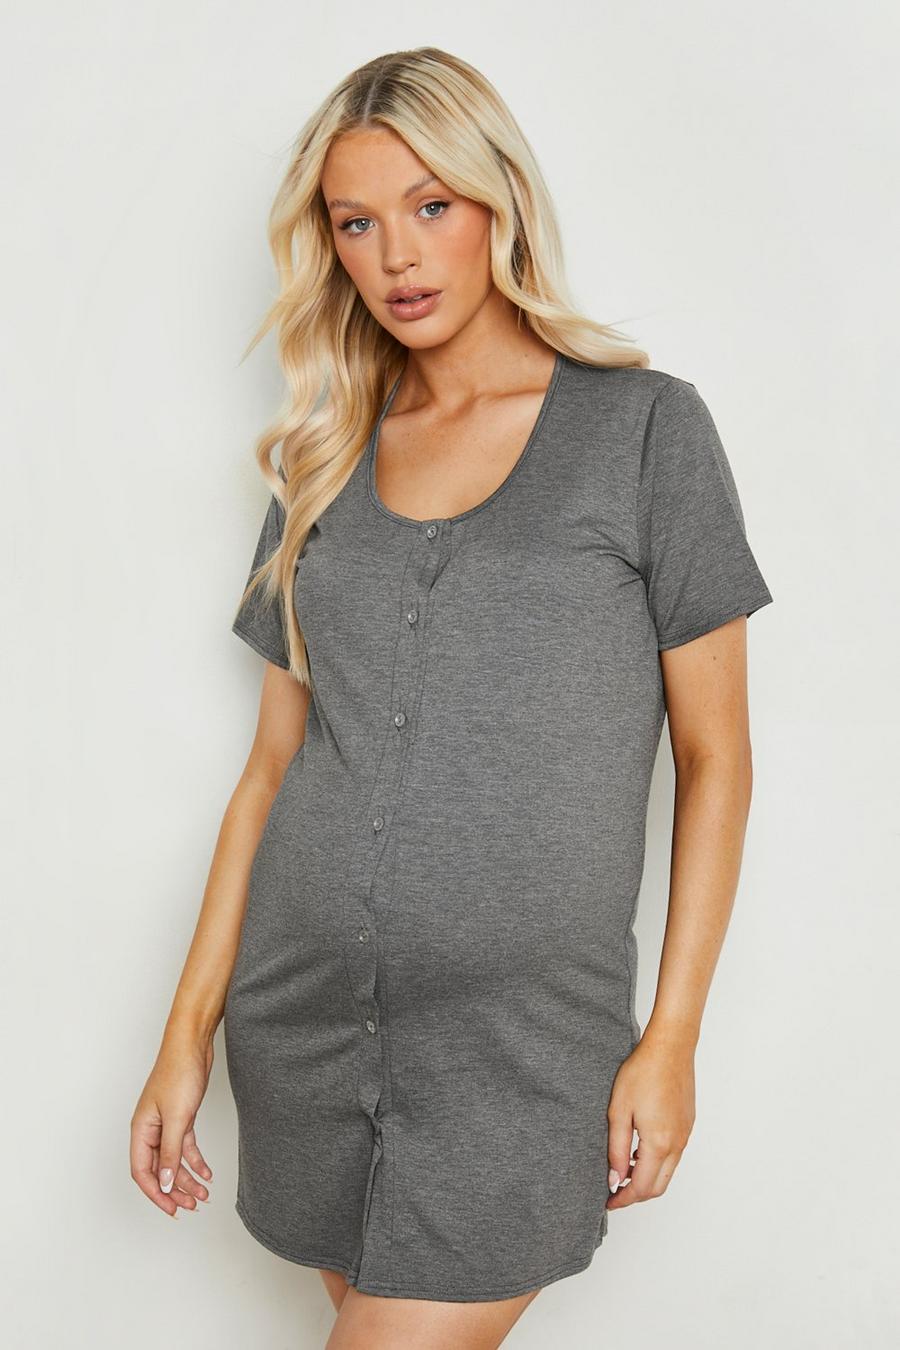 Charcoal grey Maternity Button Front Nightie 